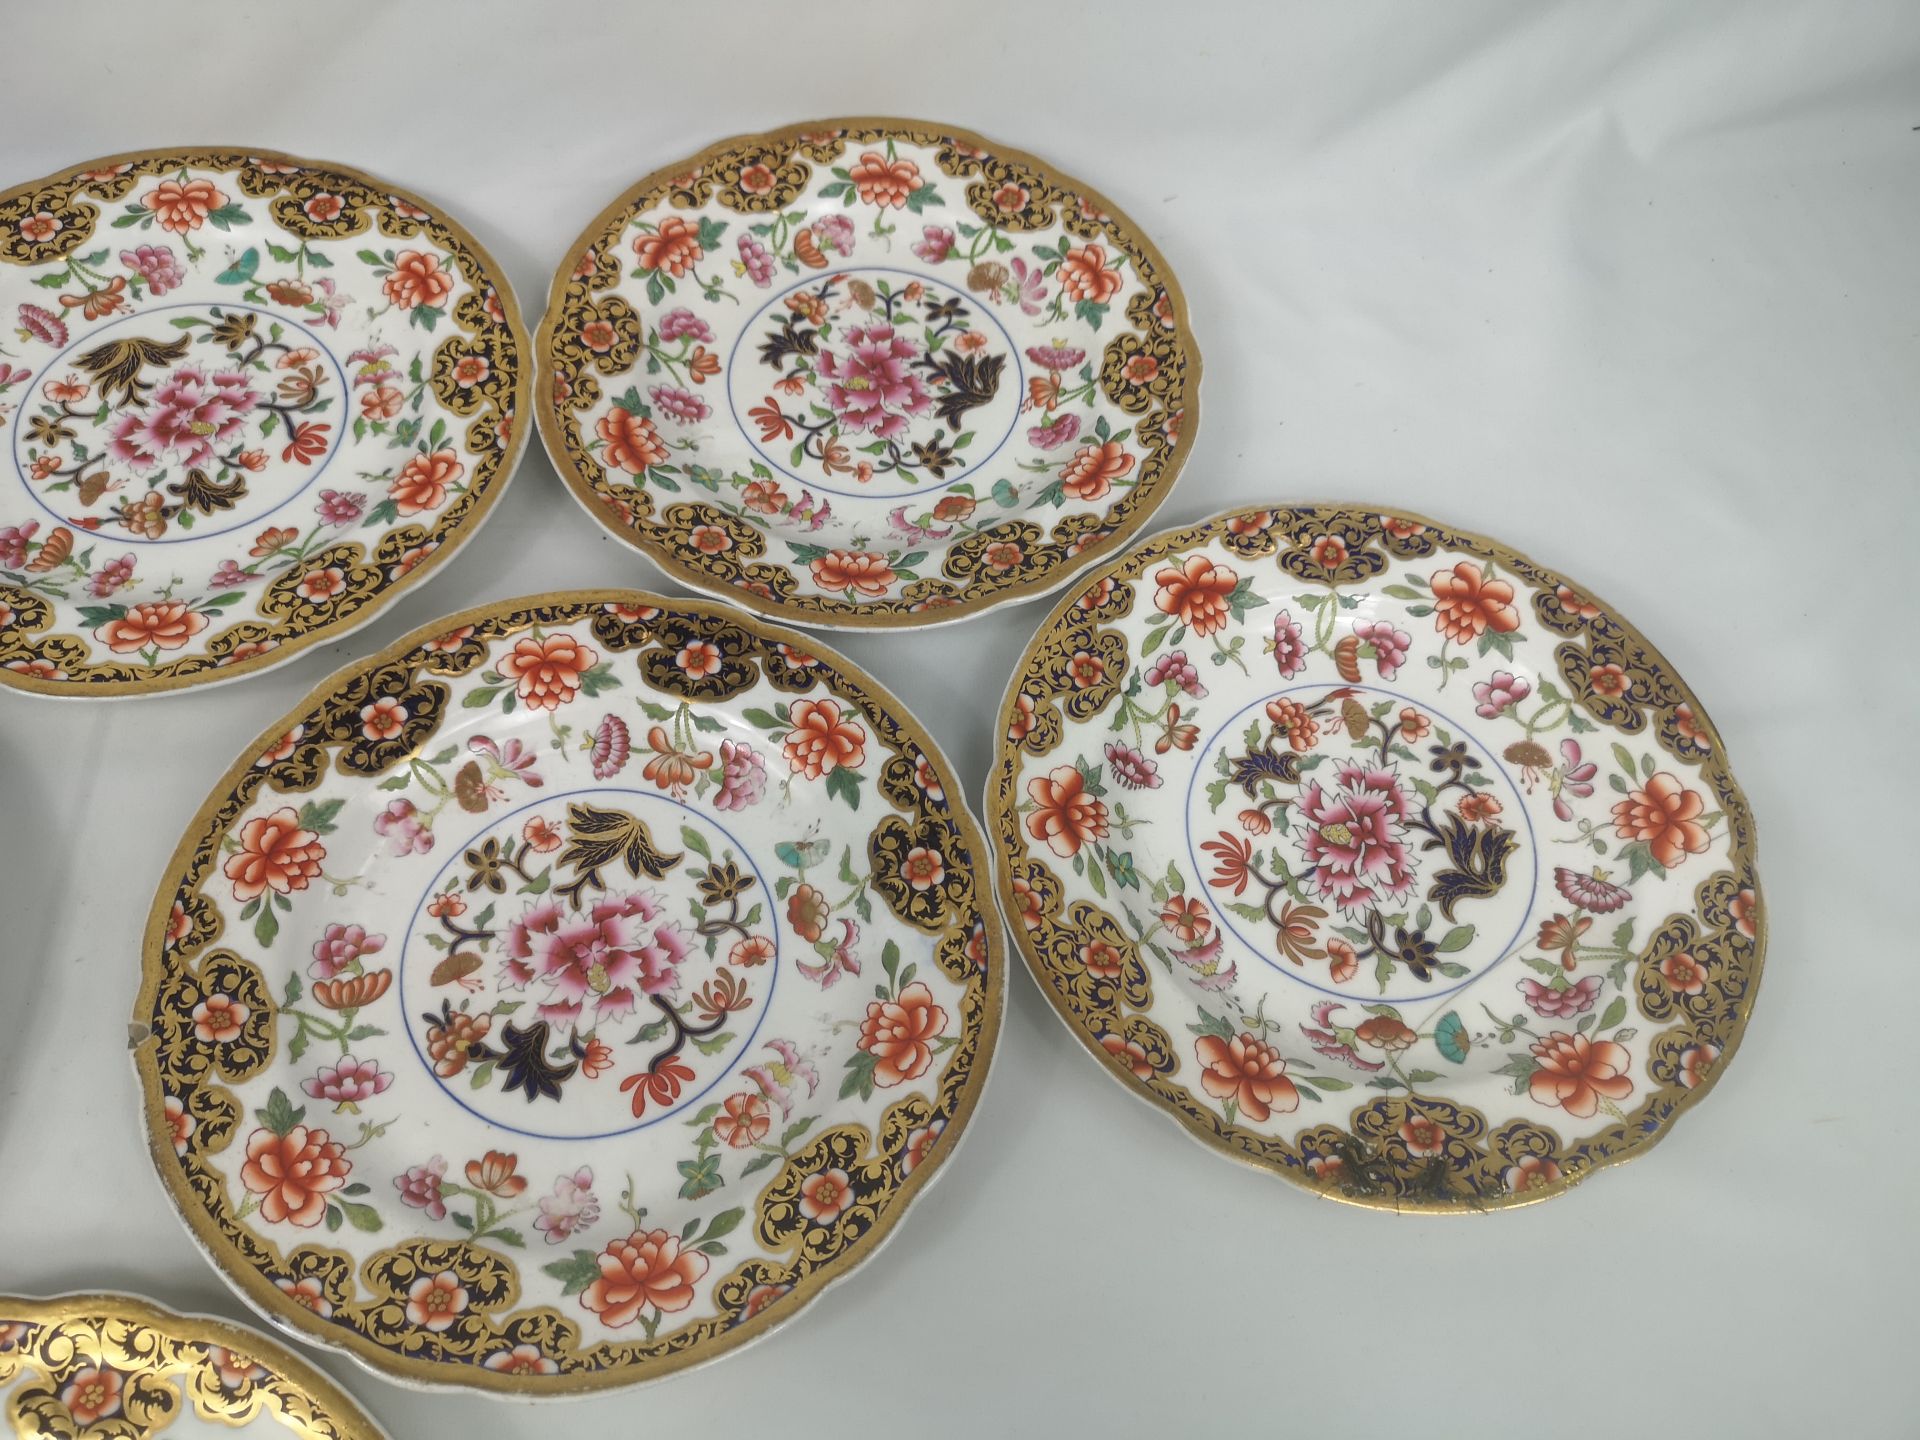 Eight 19th century Spode plates - Image 3 of 4